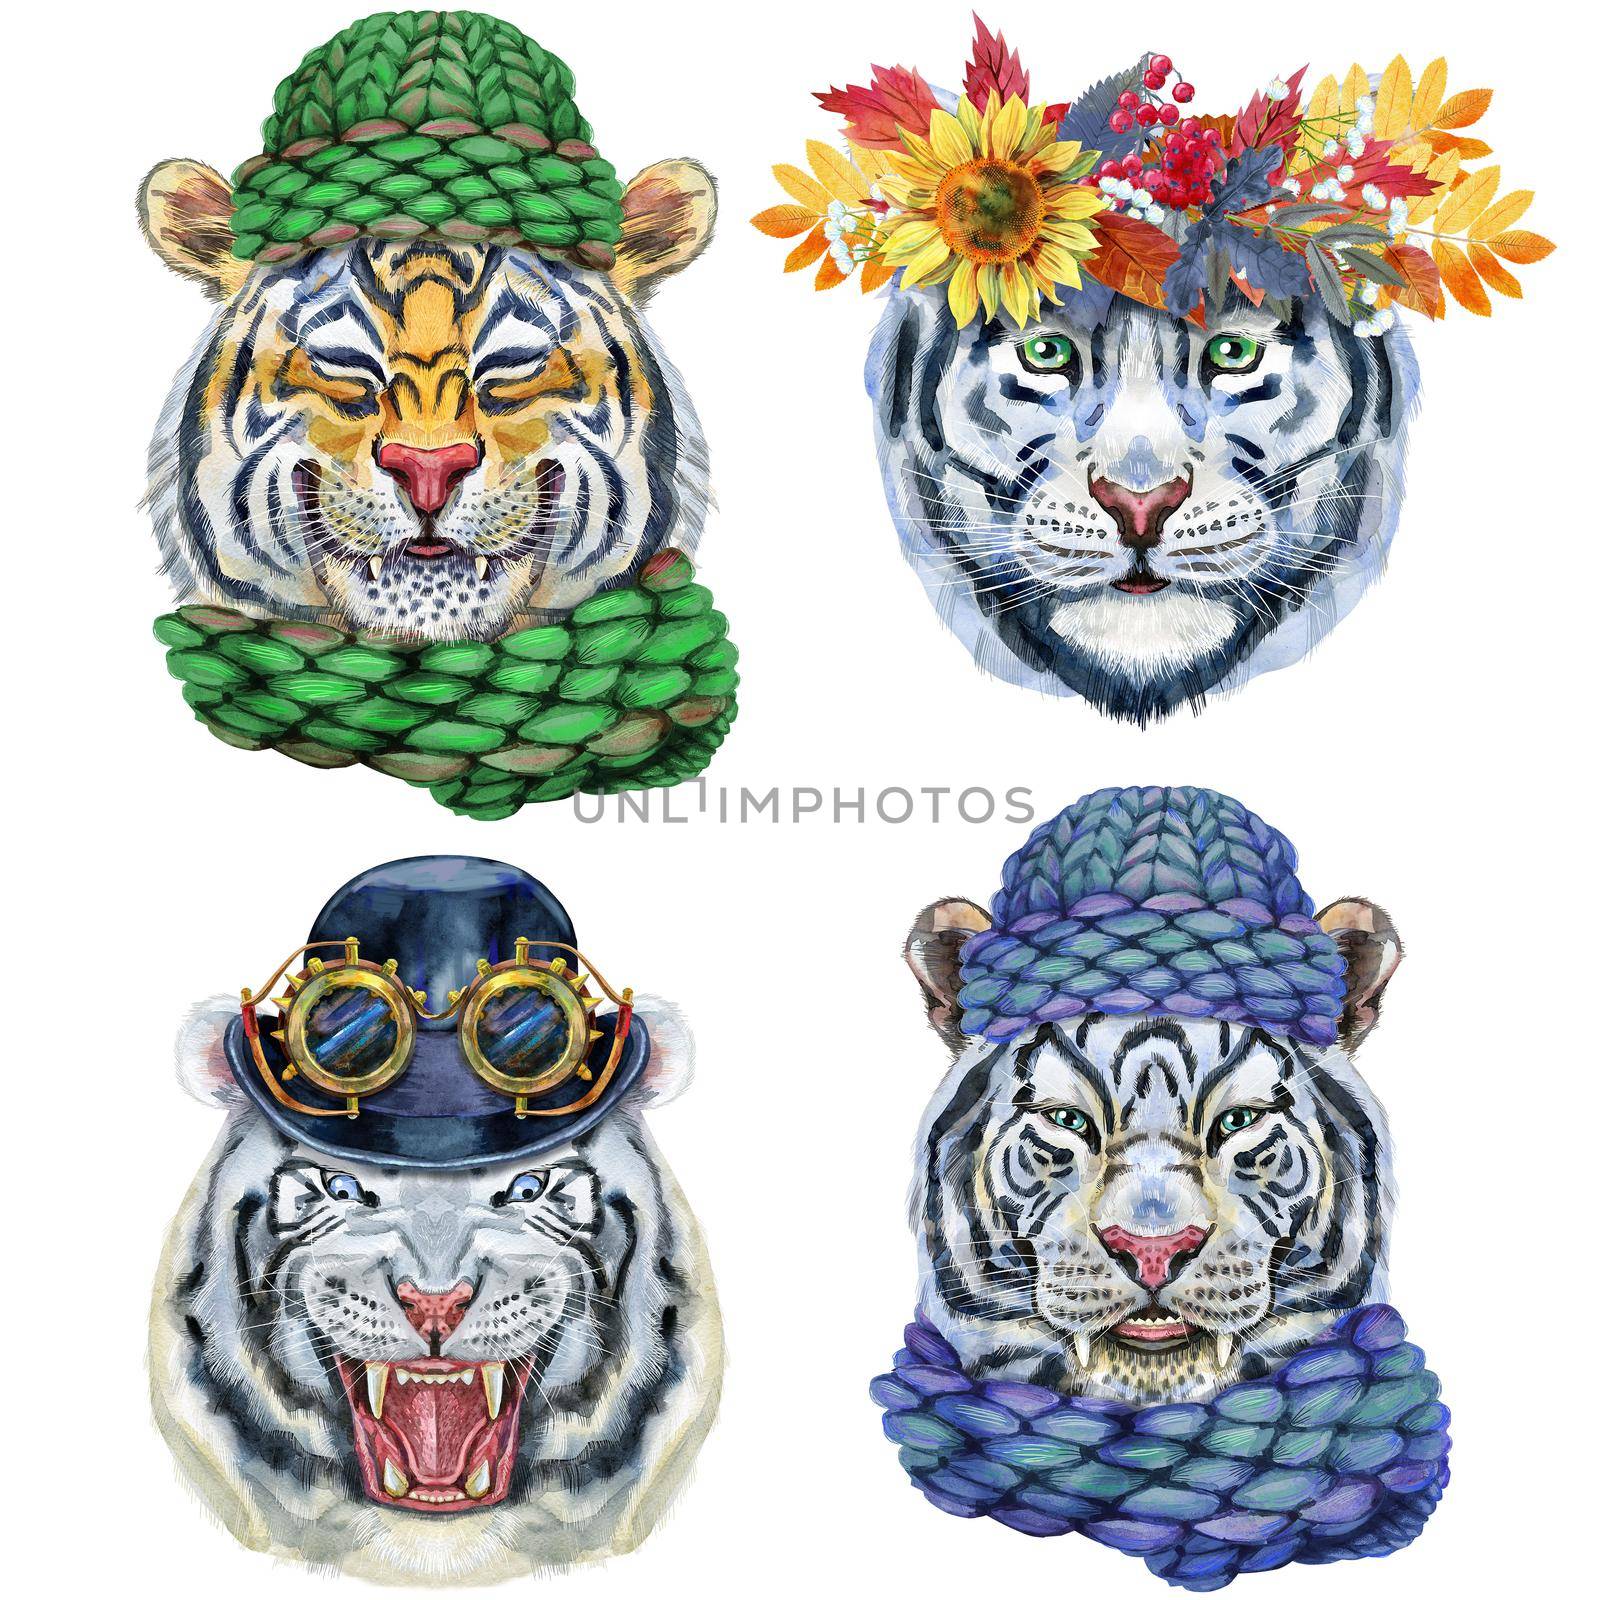 Watercolor illustration of tigers in a knitted winter hat, bowler hat with goggles and a wreath of autumn leaves